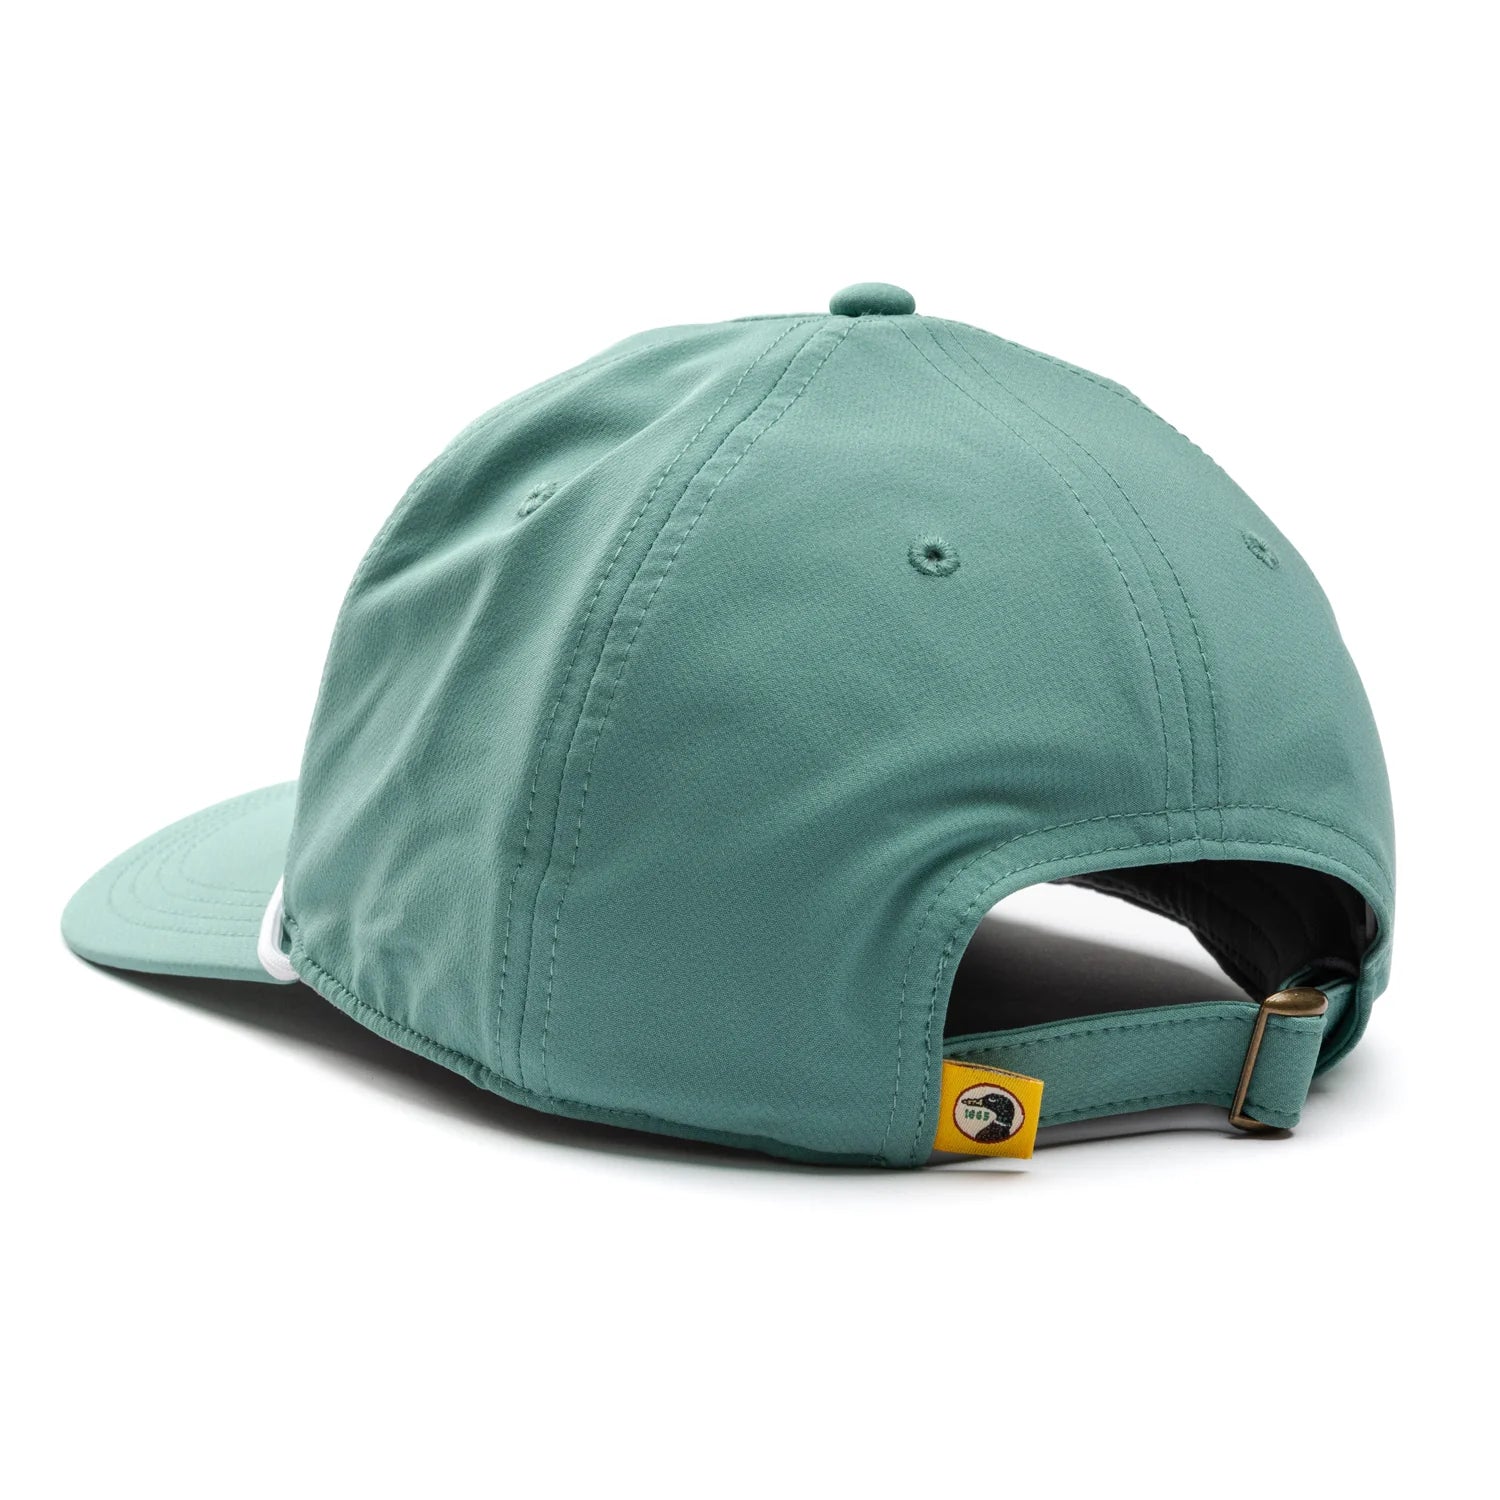 Duck Head Performance 5-Panel Unstructured Hat - Seaboard Green